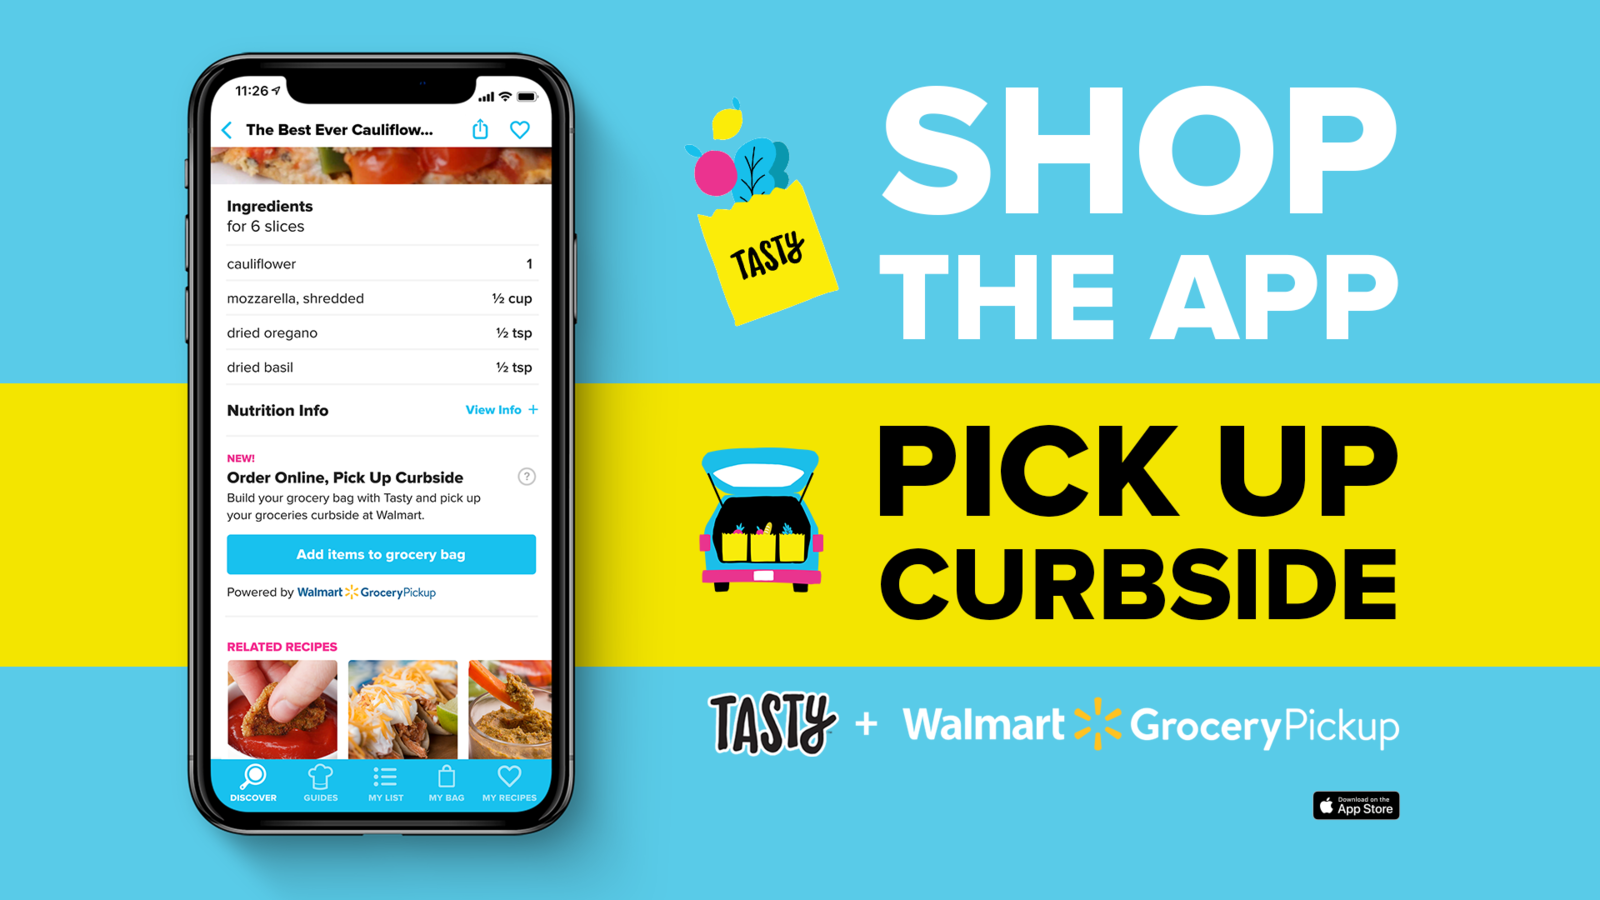 The image depicts a smartphone displaying a recipe and a promotion for a grocery pickup app collaboration between Tasty and Walmart